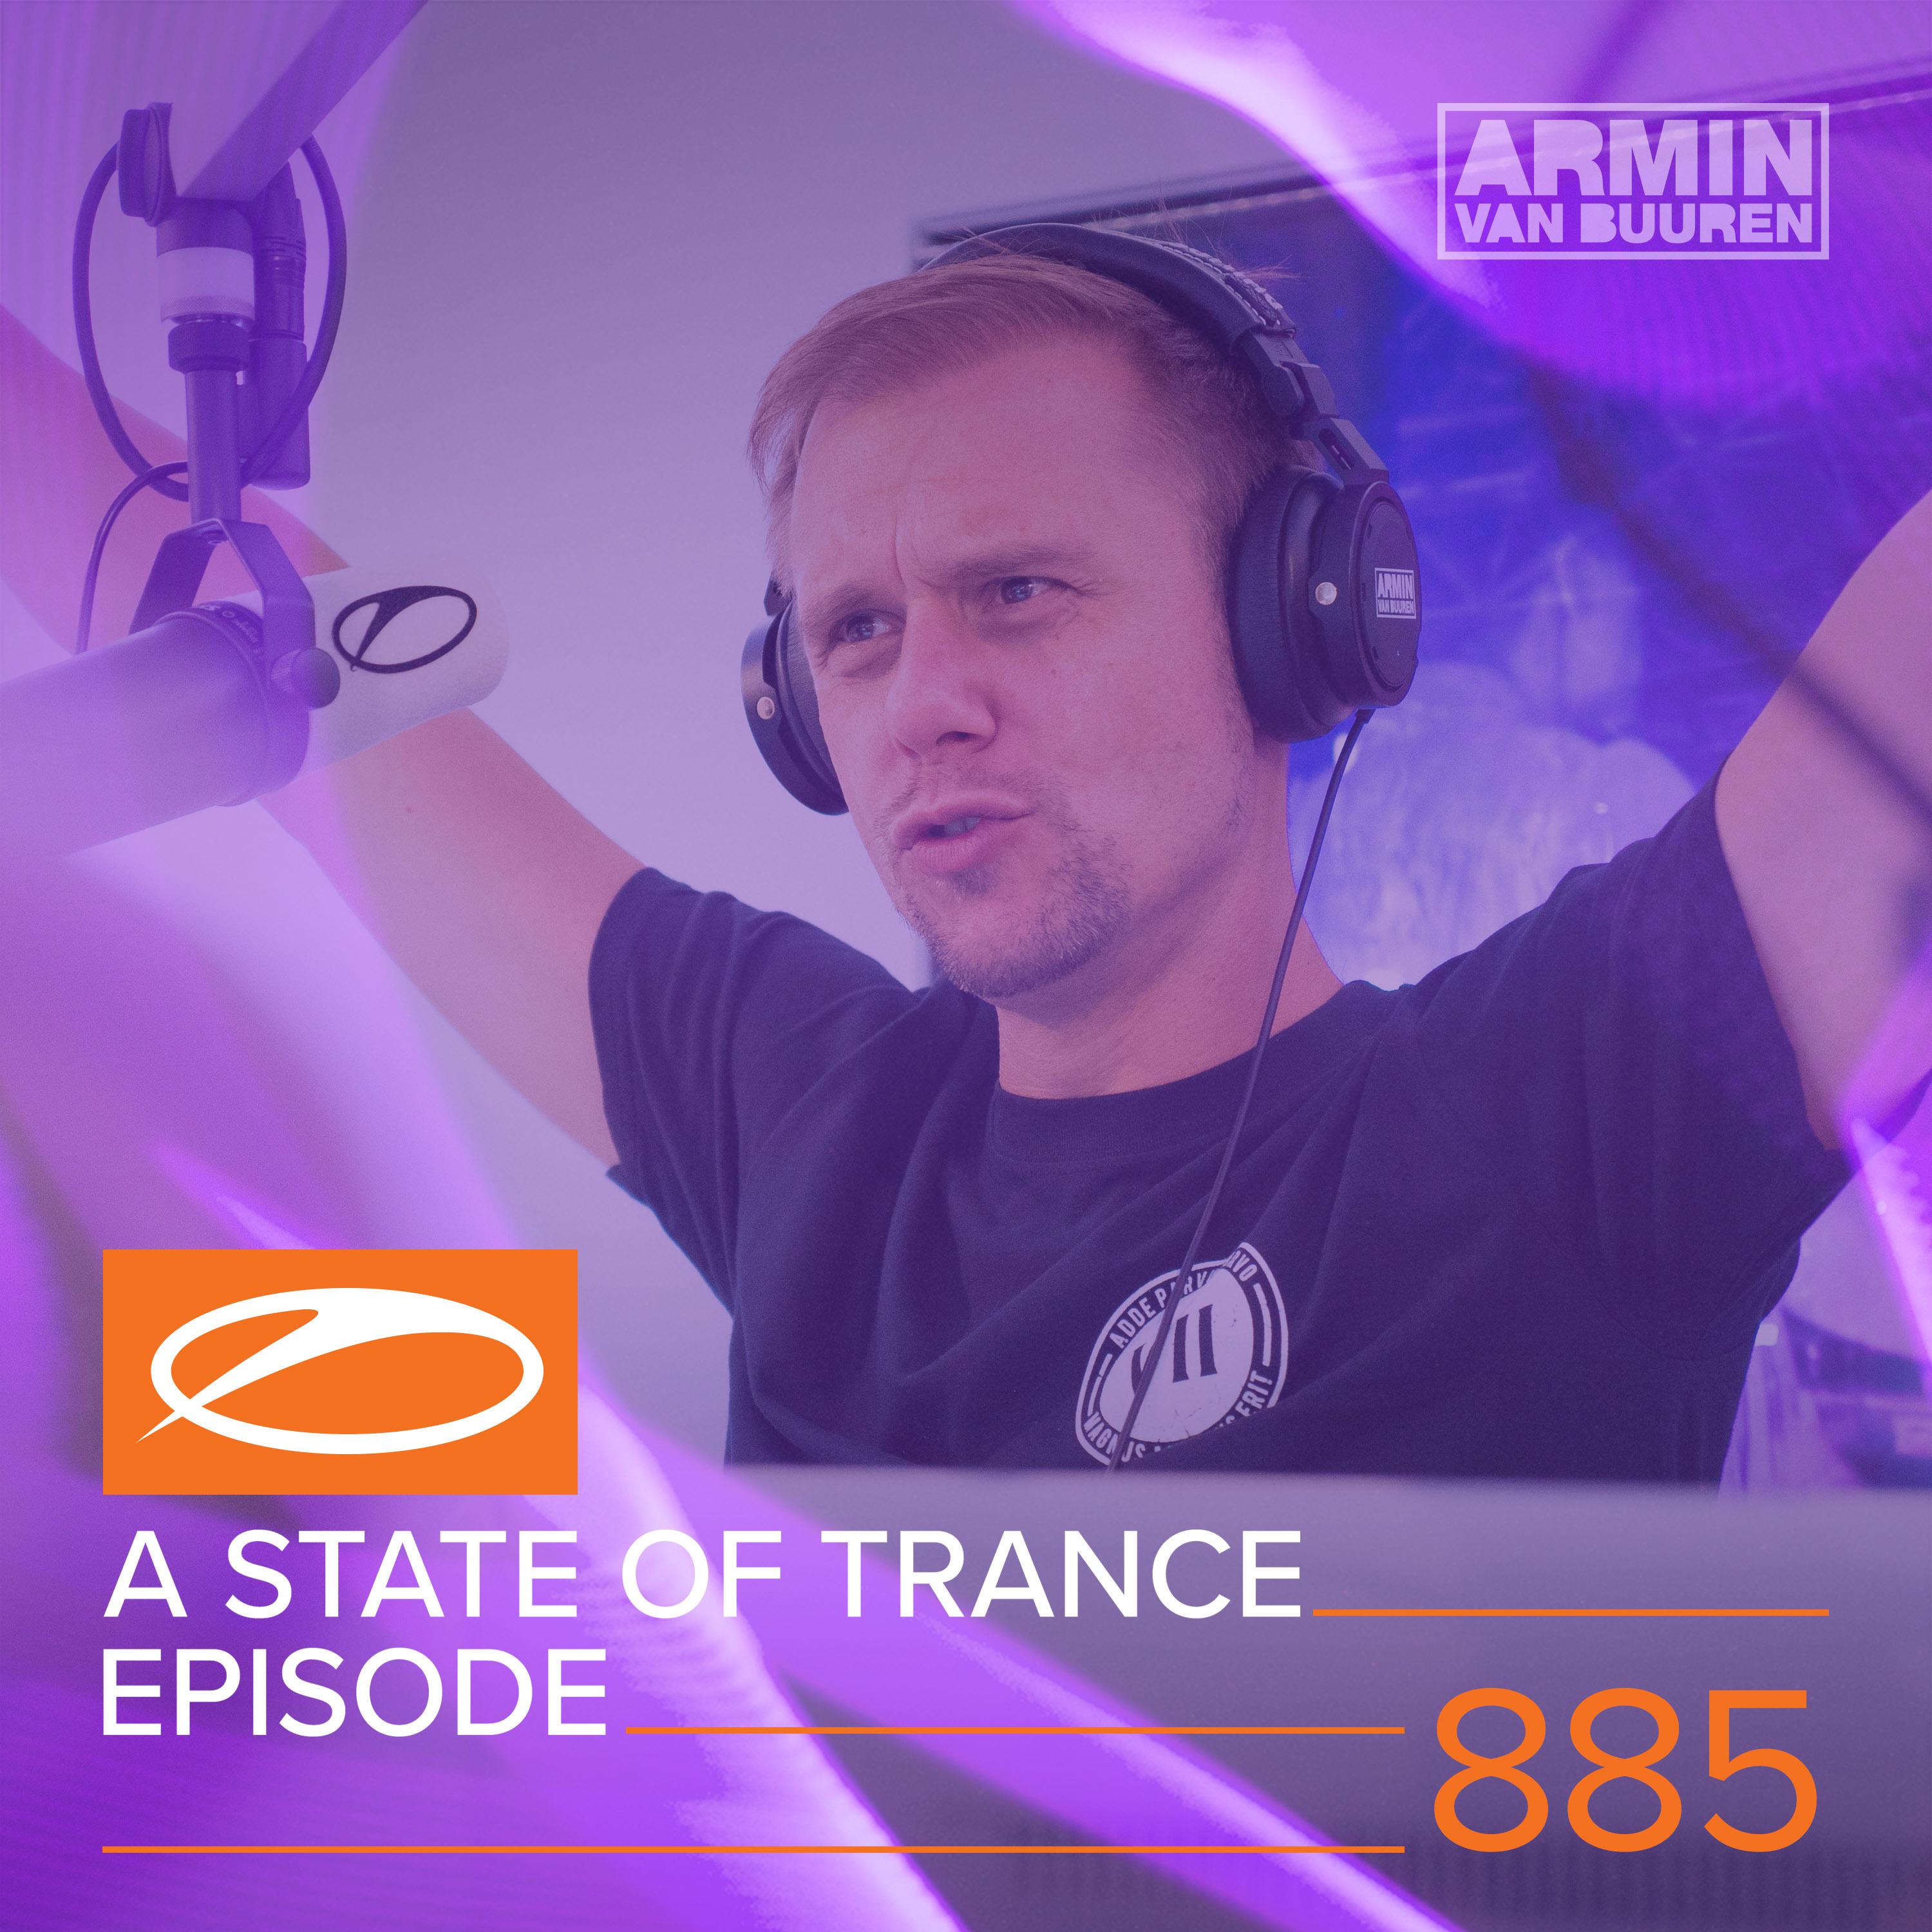 A State Of Trance (ASOT 885) (Phone Call with Markus Schulz, Pt. 4)